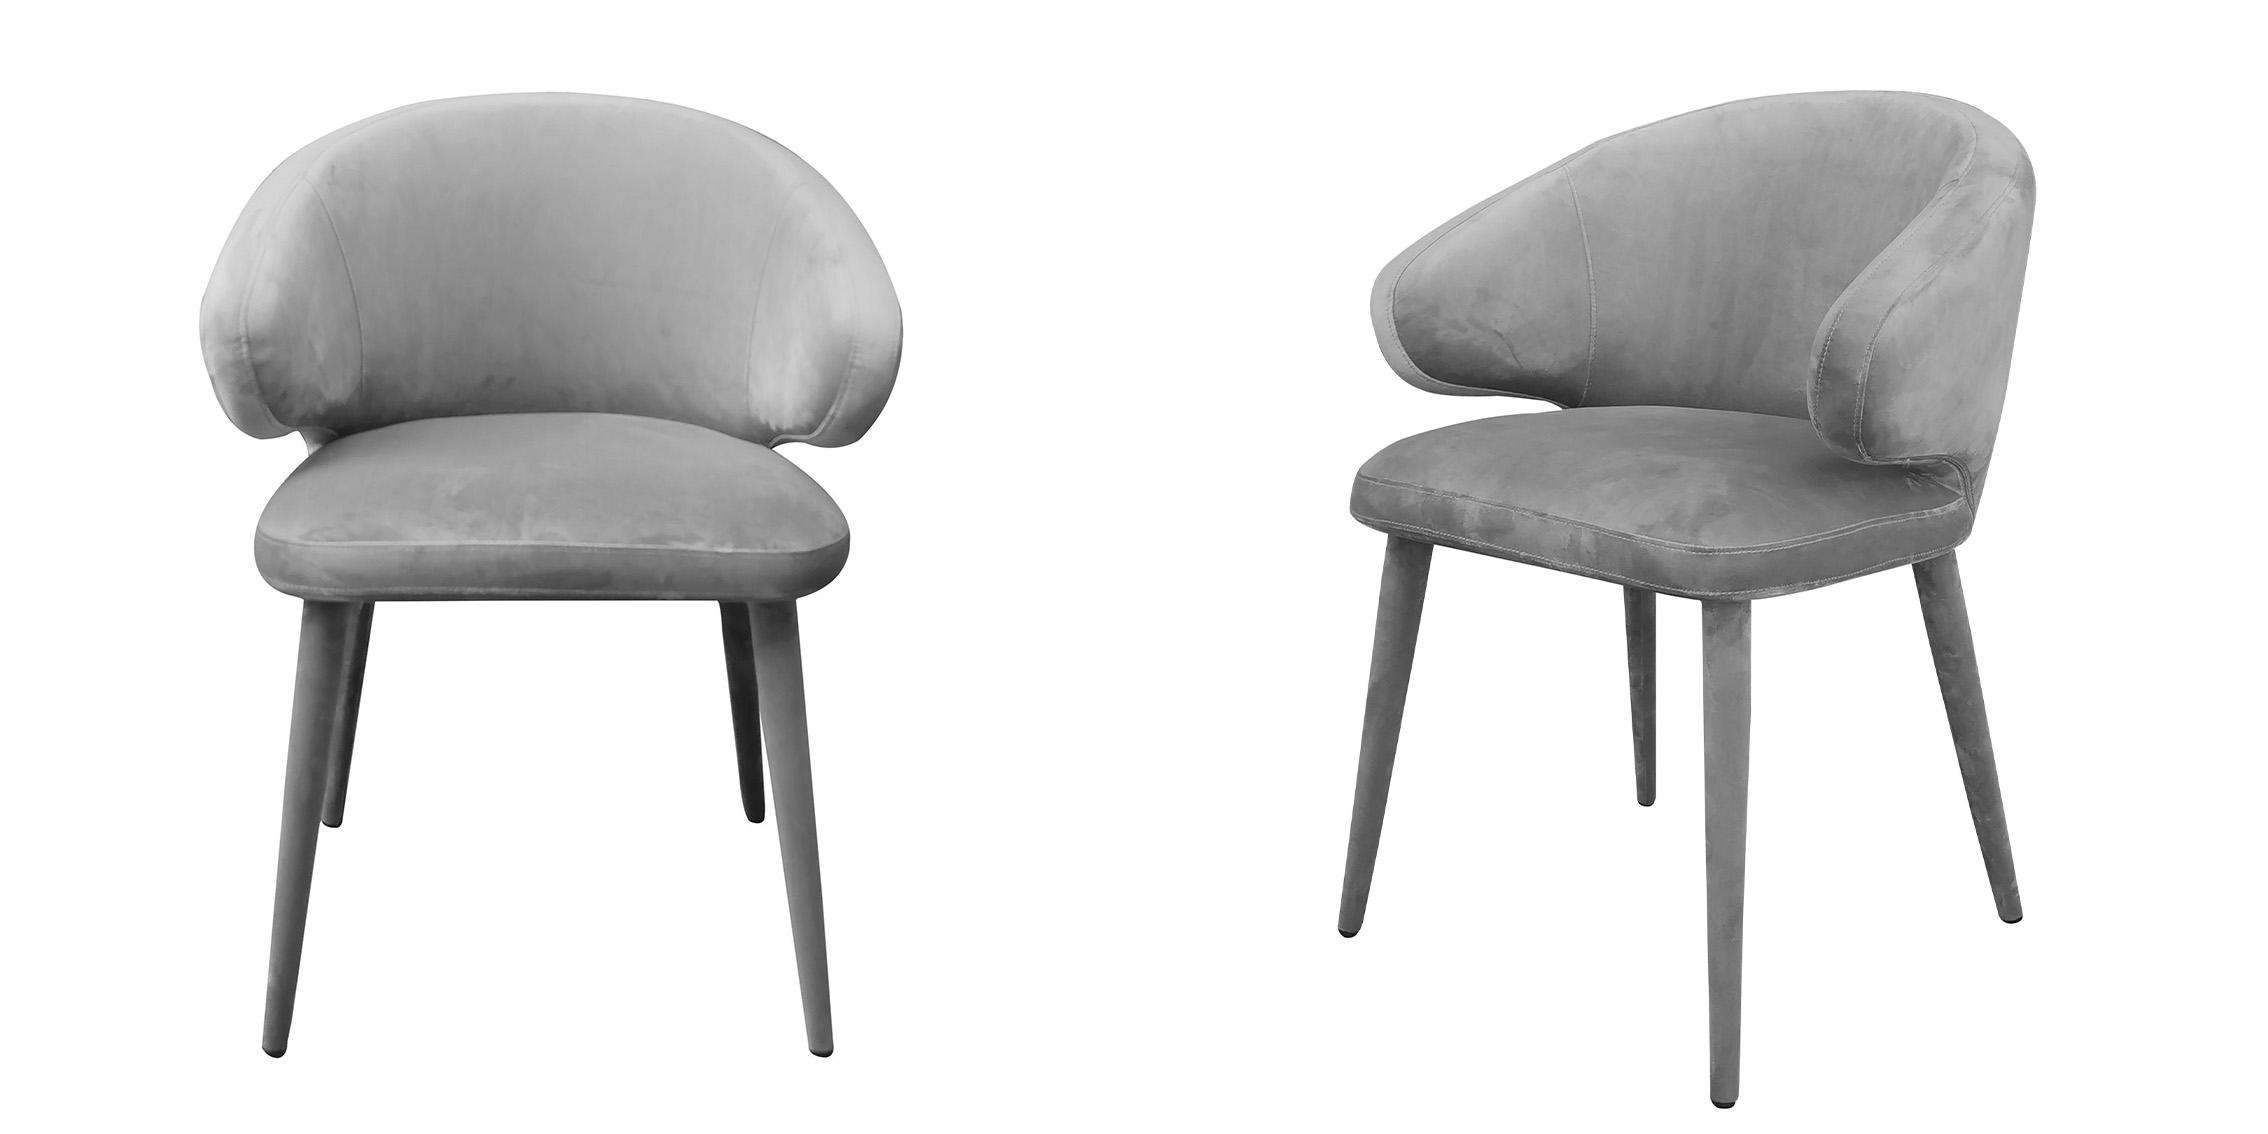 Contemporary, Modern Dining Chair Set Salem VGEUMC-9253CH-A-GRY-DC-2pcs in Gray Fabric